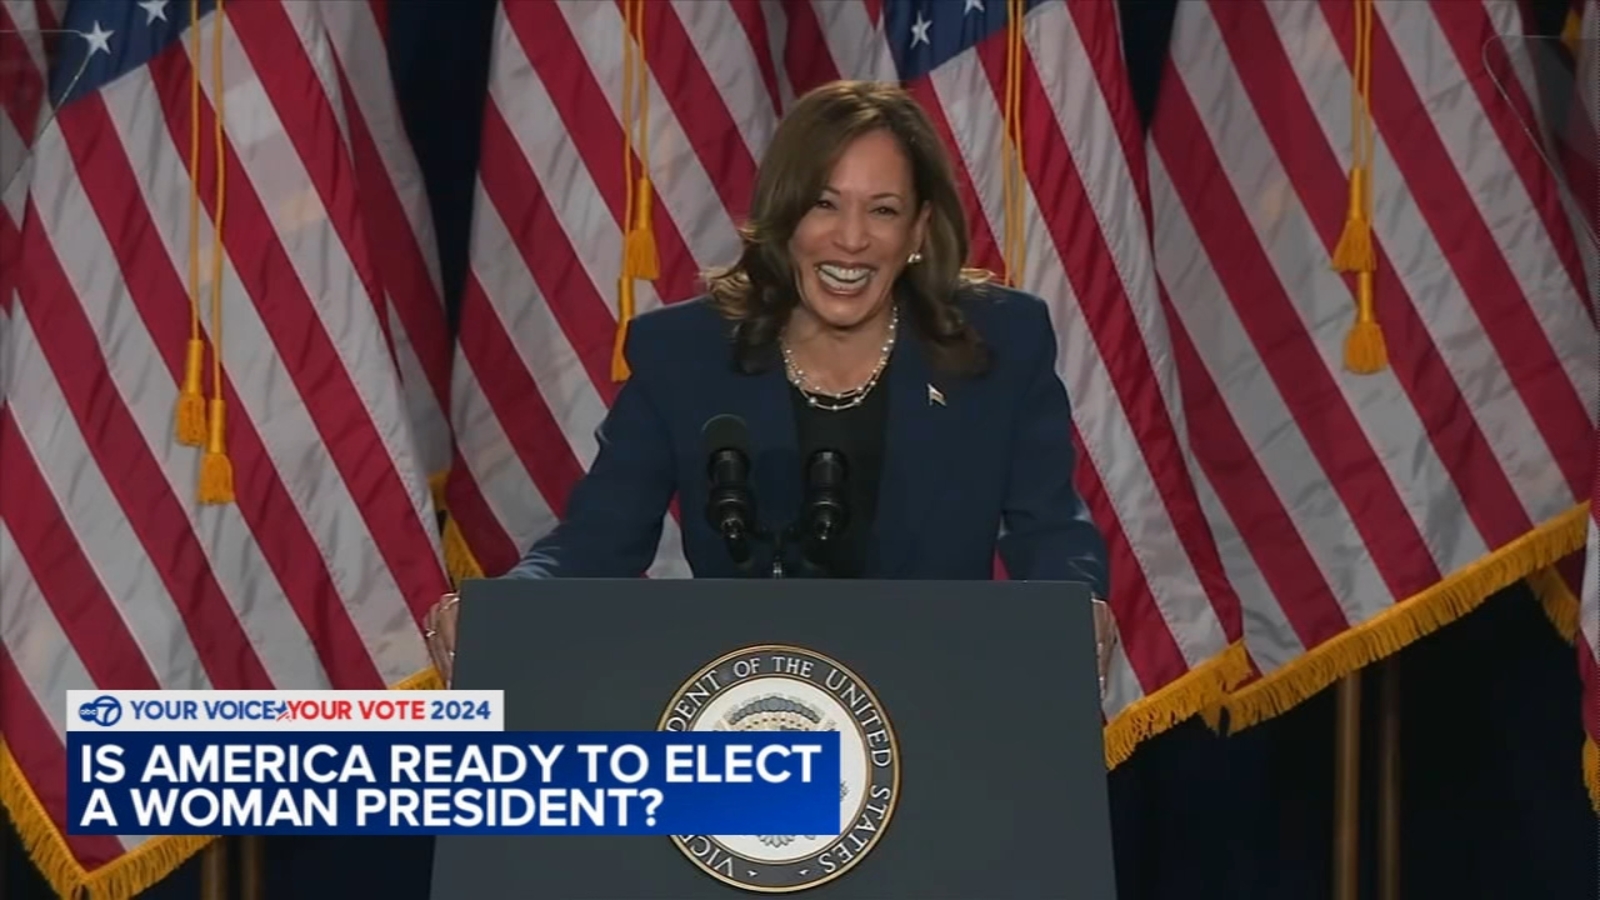 2024 Election: With Kamala Harris at the top of the Democratic ticket, is America finally ready for a woman president? [Video]